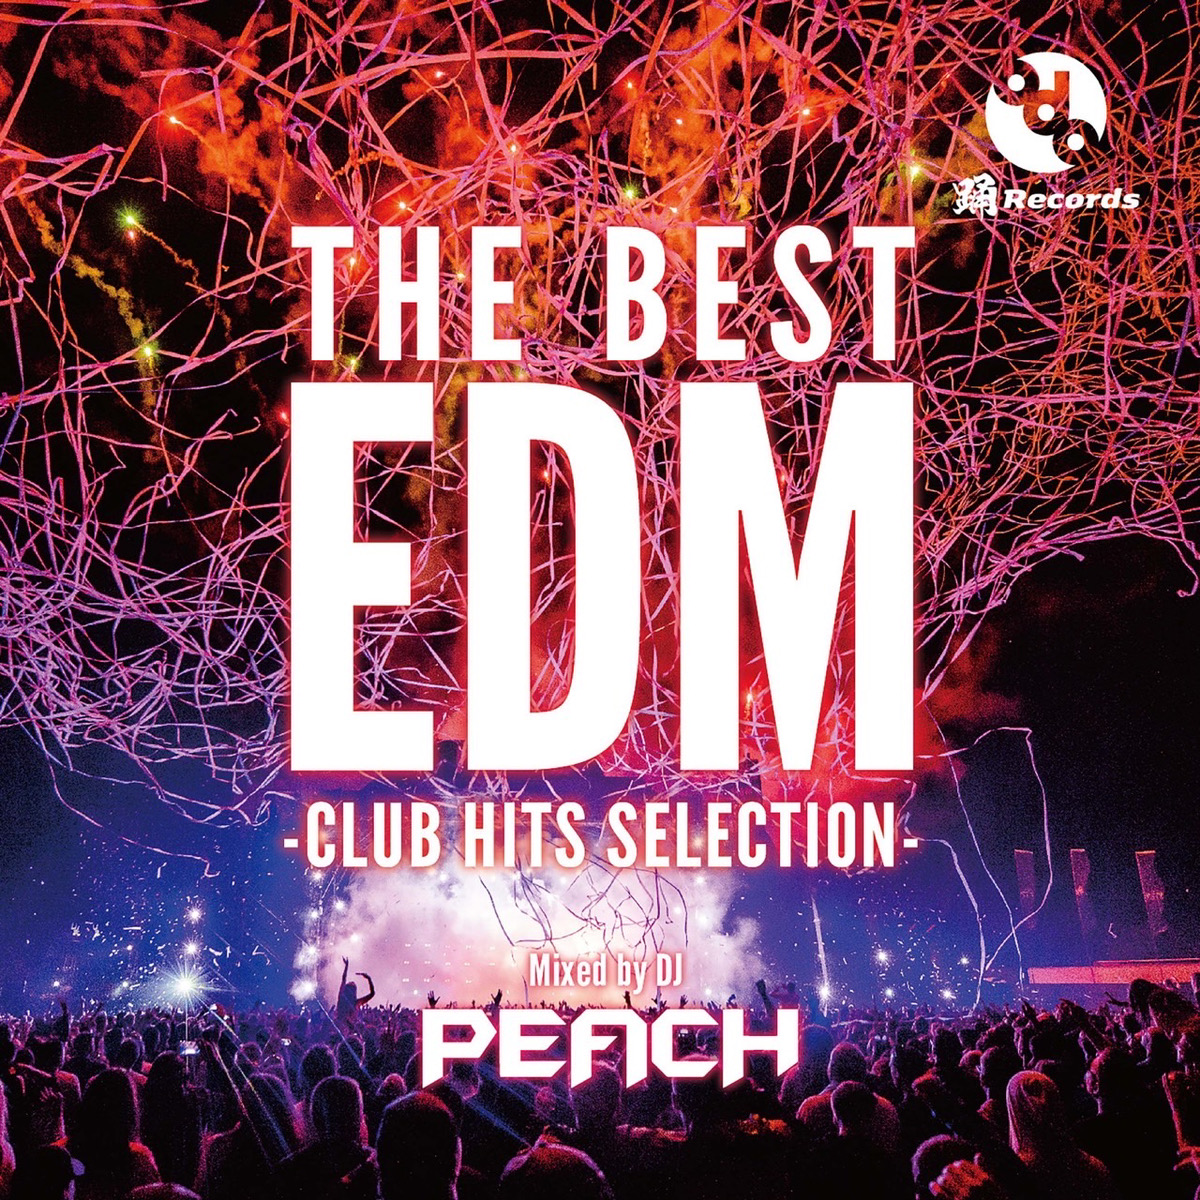 THE BEST EDM -CLUB HITS SELECTION- (Mixed by DJ PEACH)